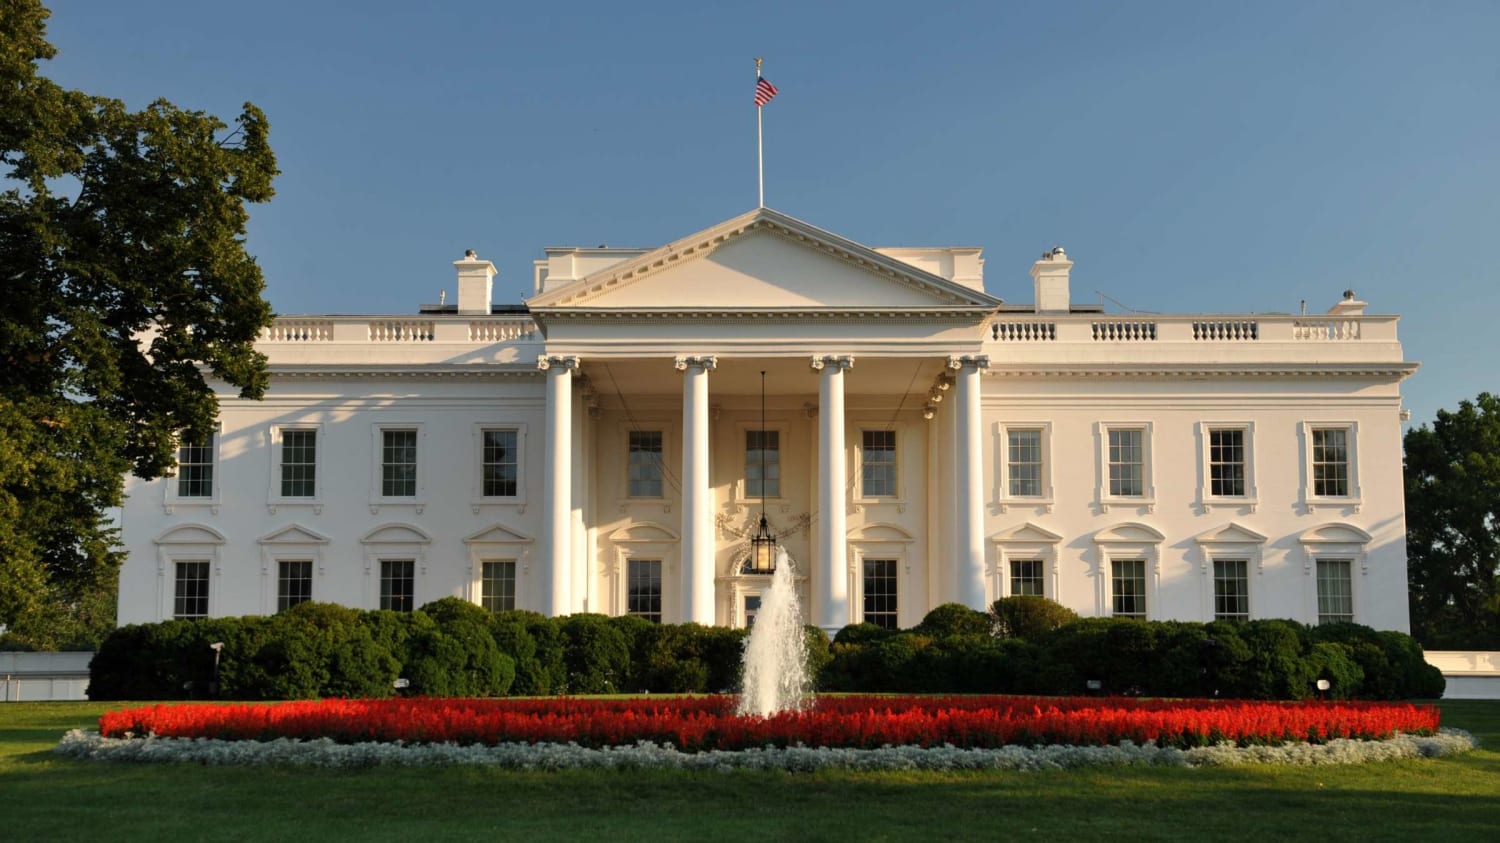 Why Is the White House White?